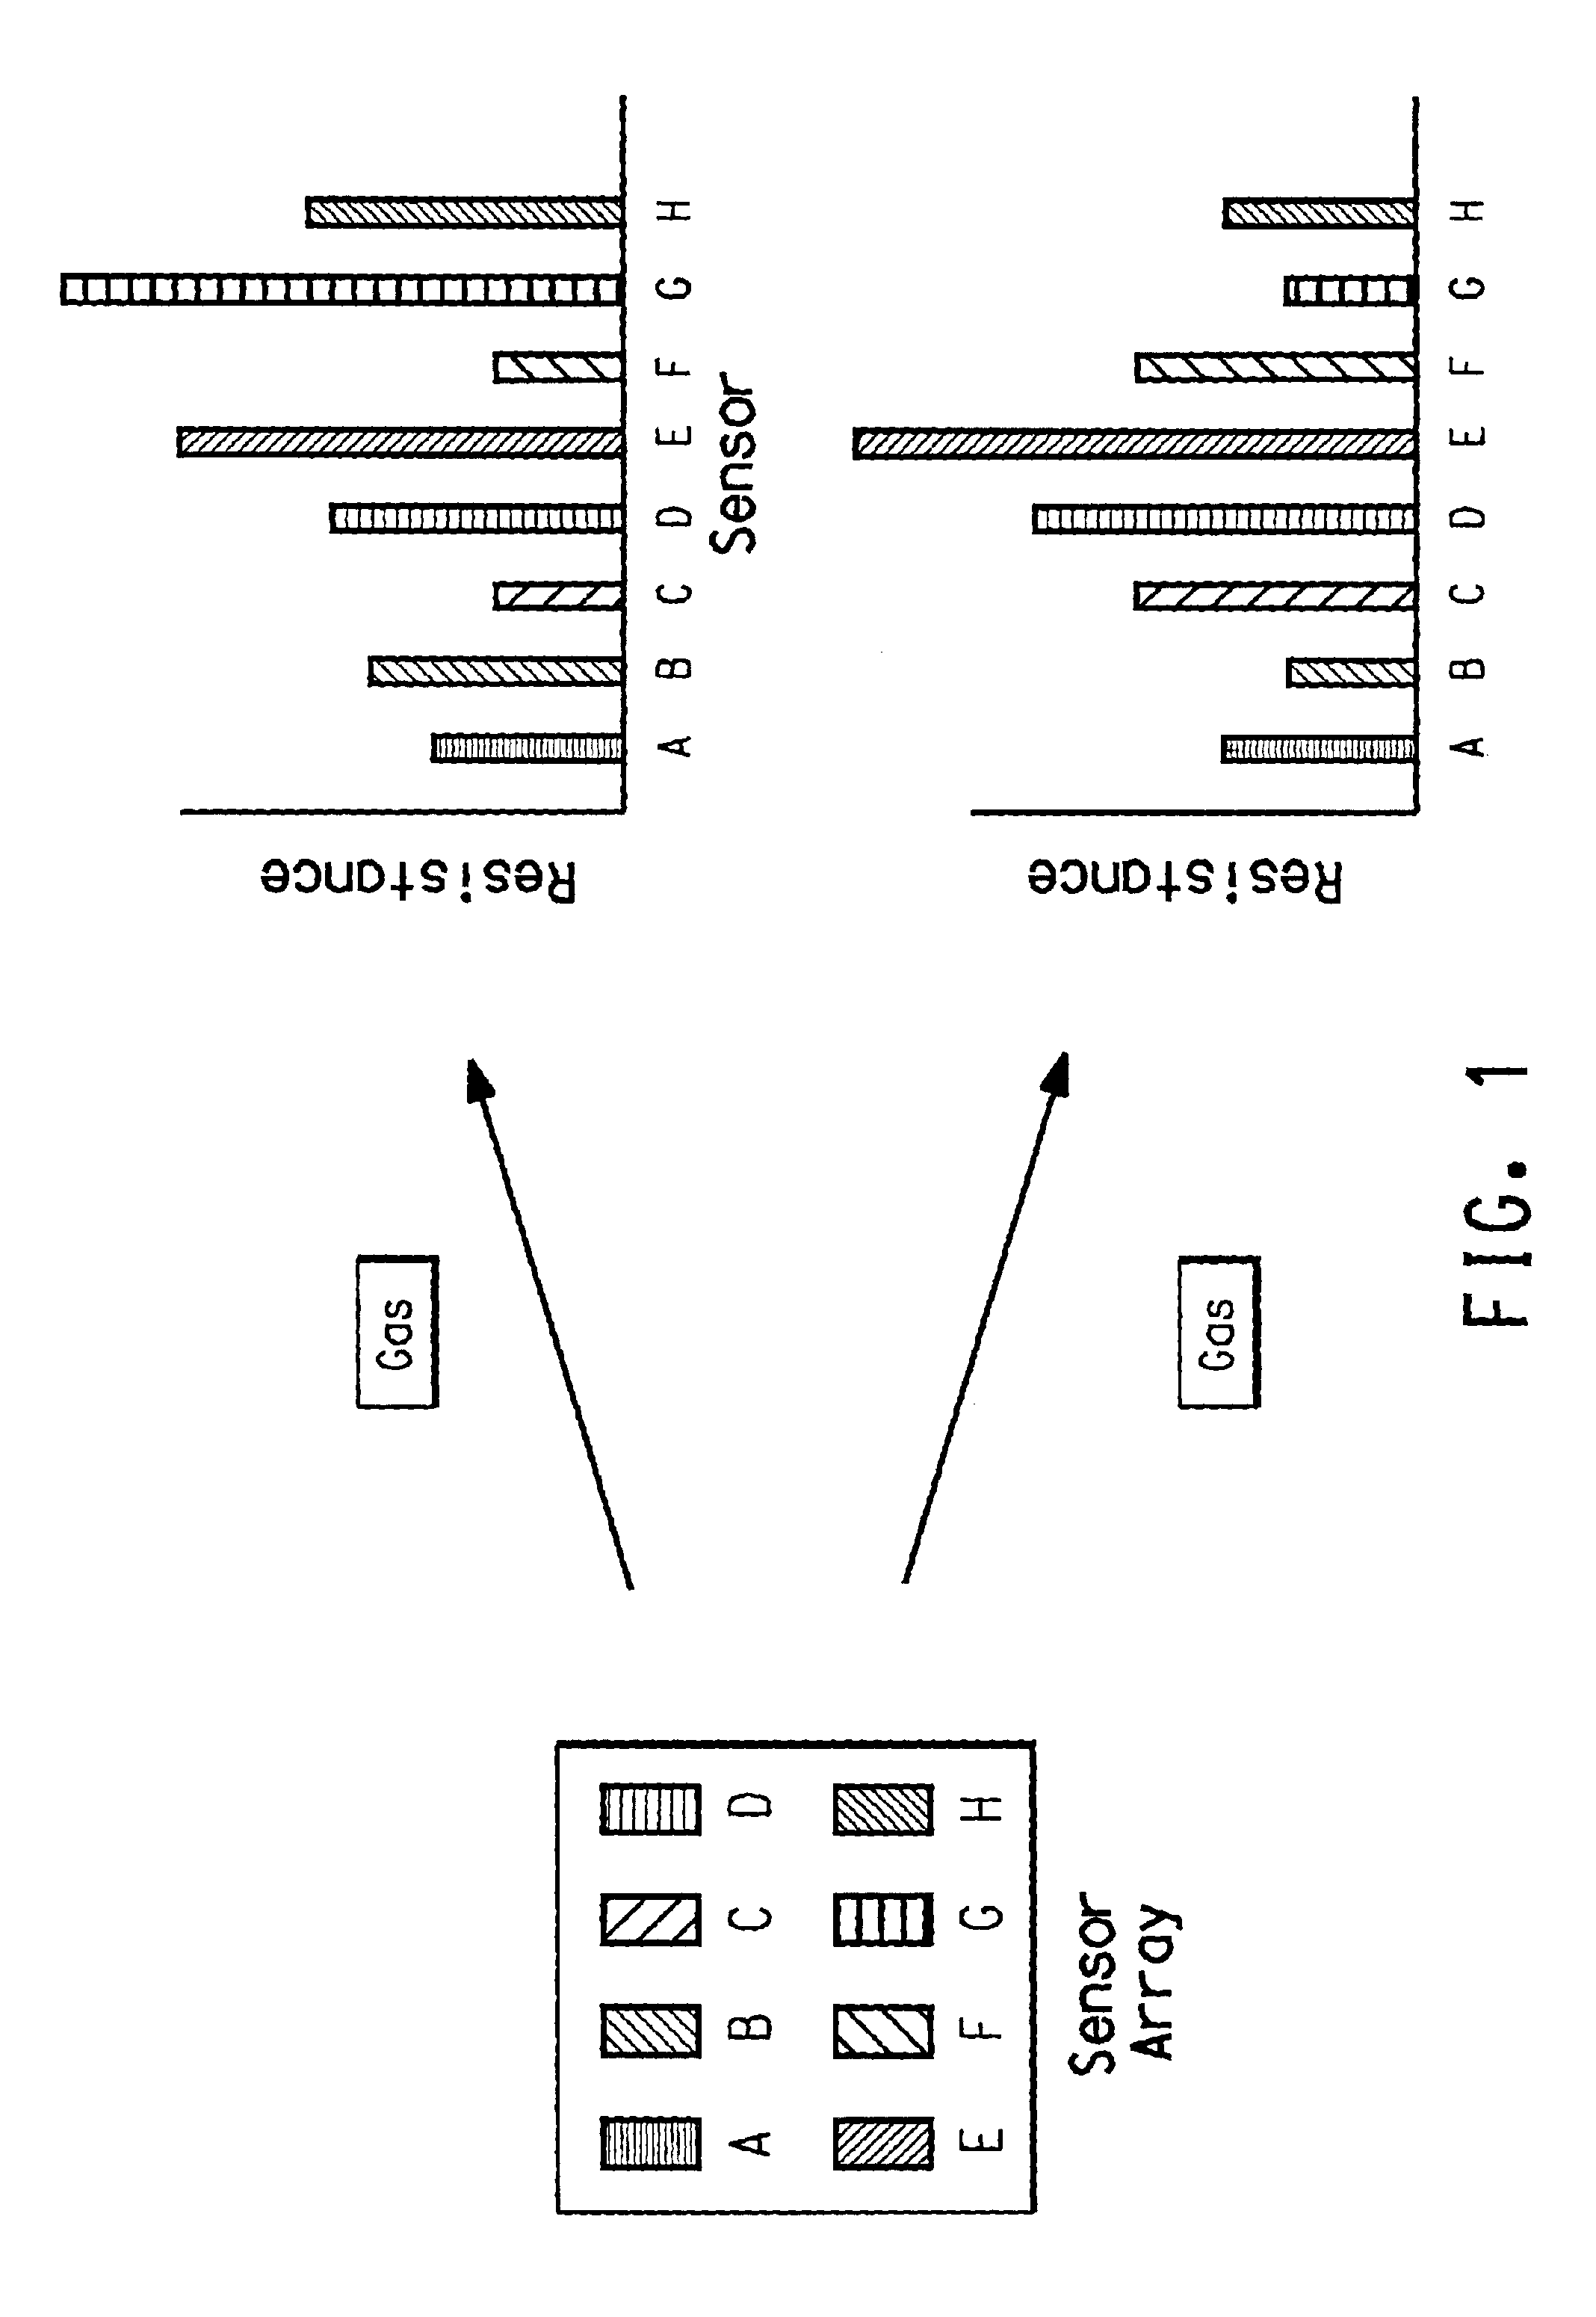 Method and apparatus for analyzing mixtures of gases